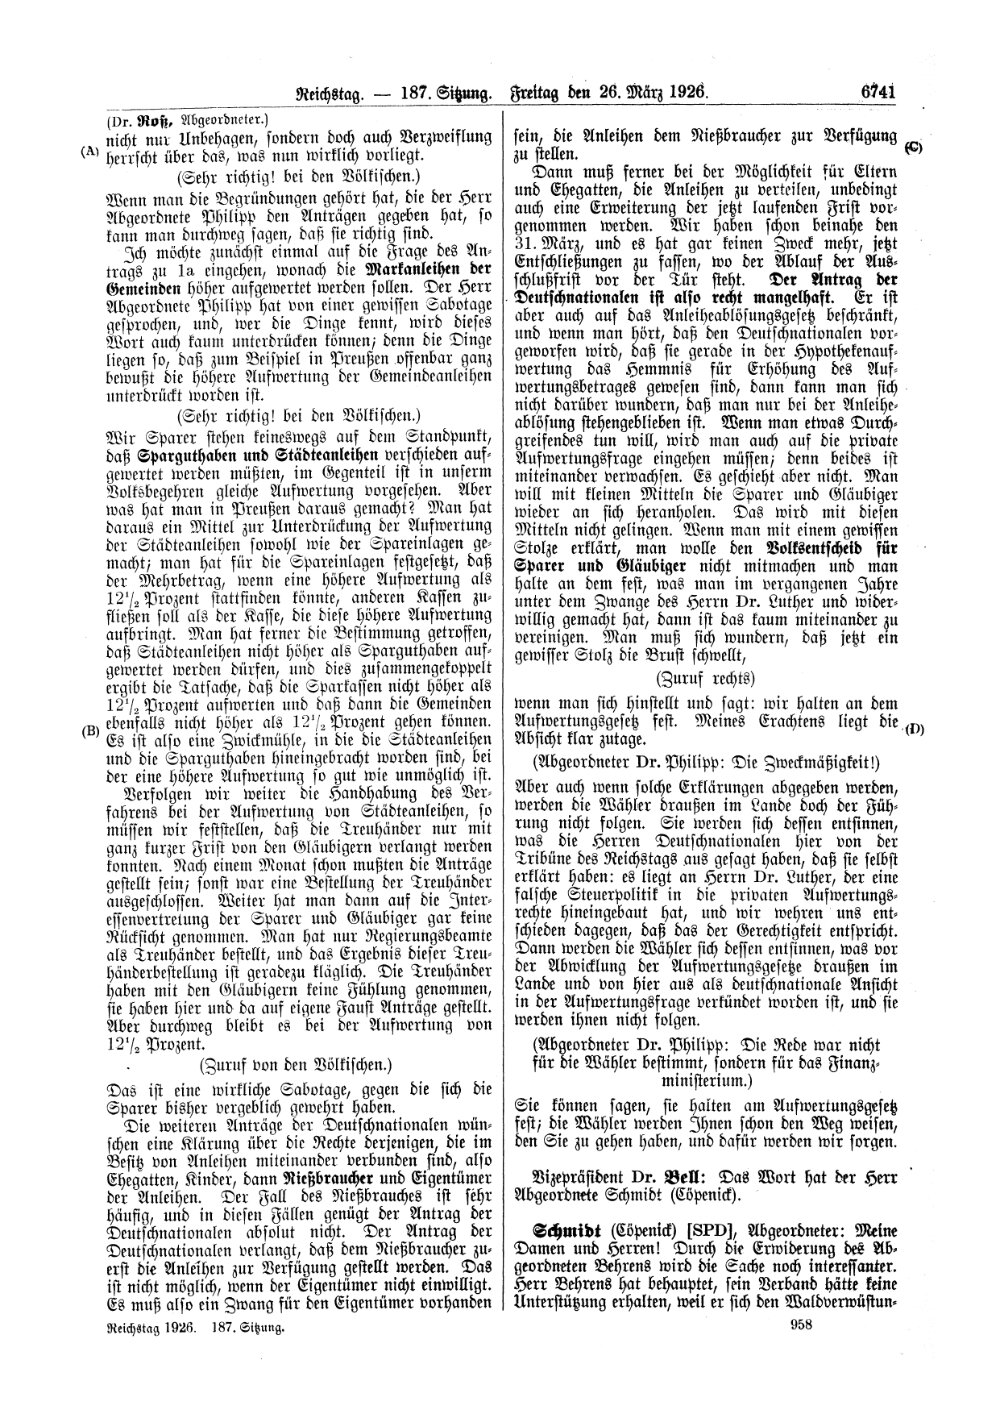 Scan of page 6741